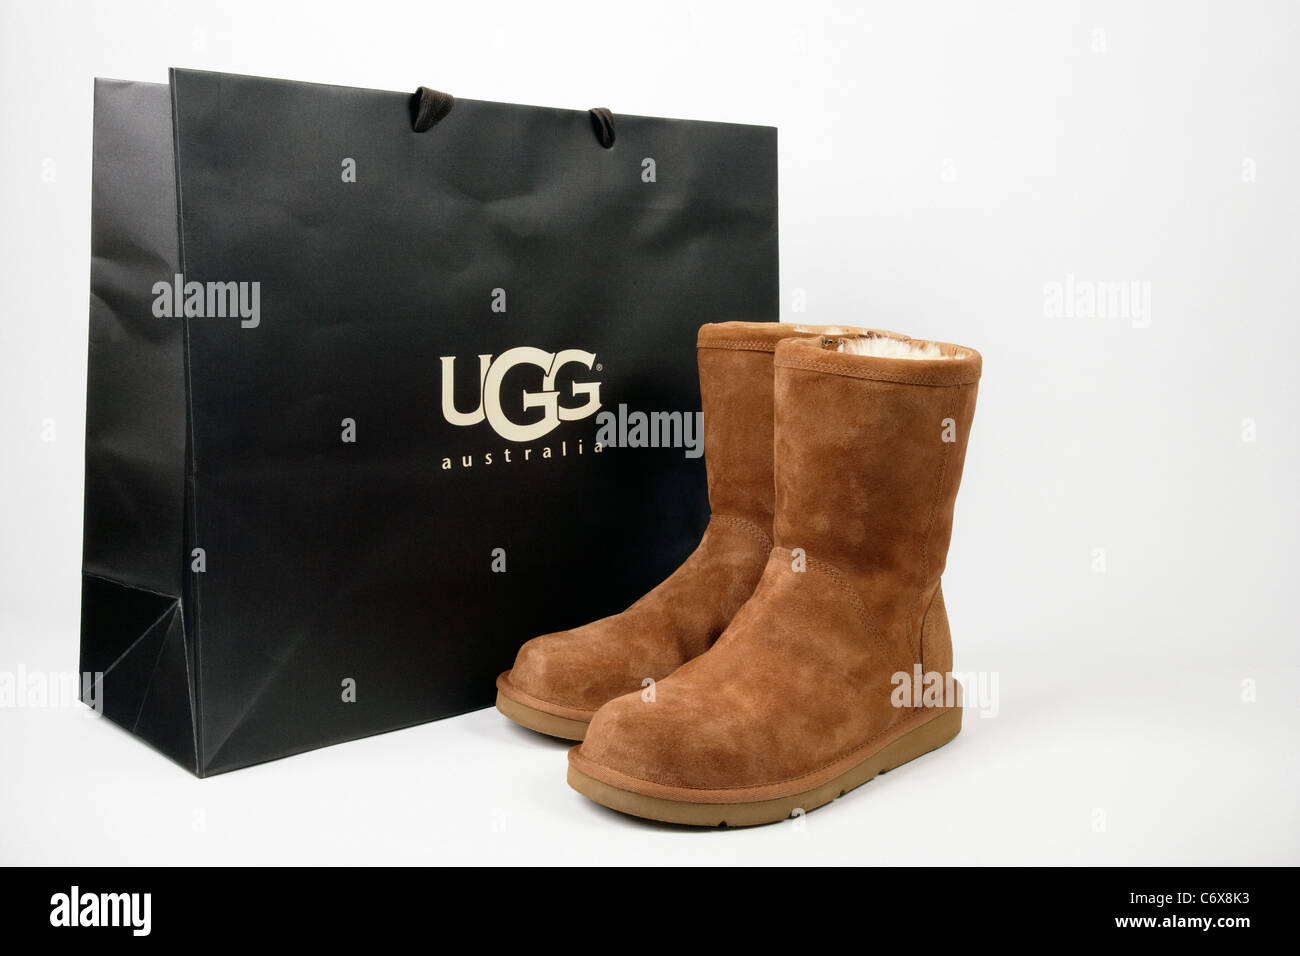 Ugg boots with original shopping bag Stock Photo - Alamy